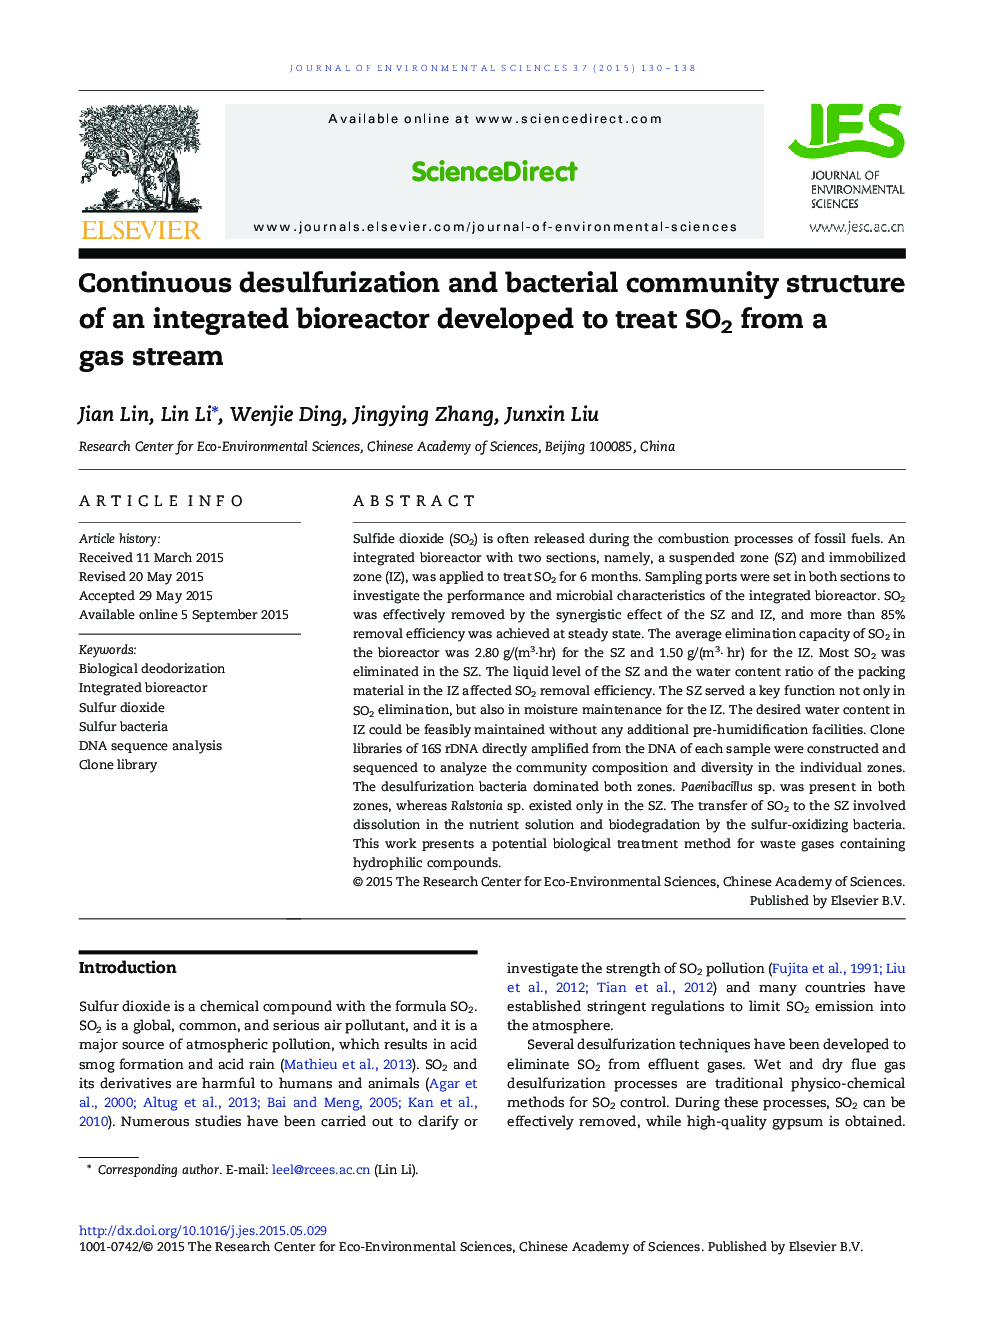 Continuous desulfurization and bacterial community structure of an integrated bioreactor developed to treat SO2 from a gas stream